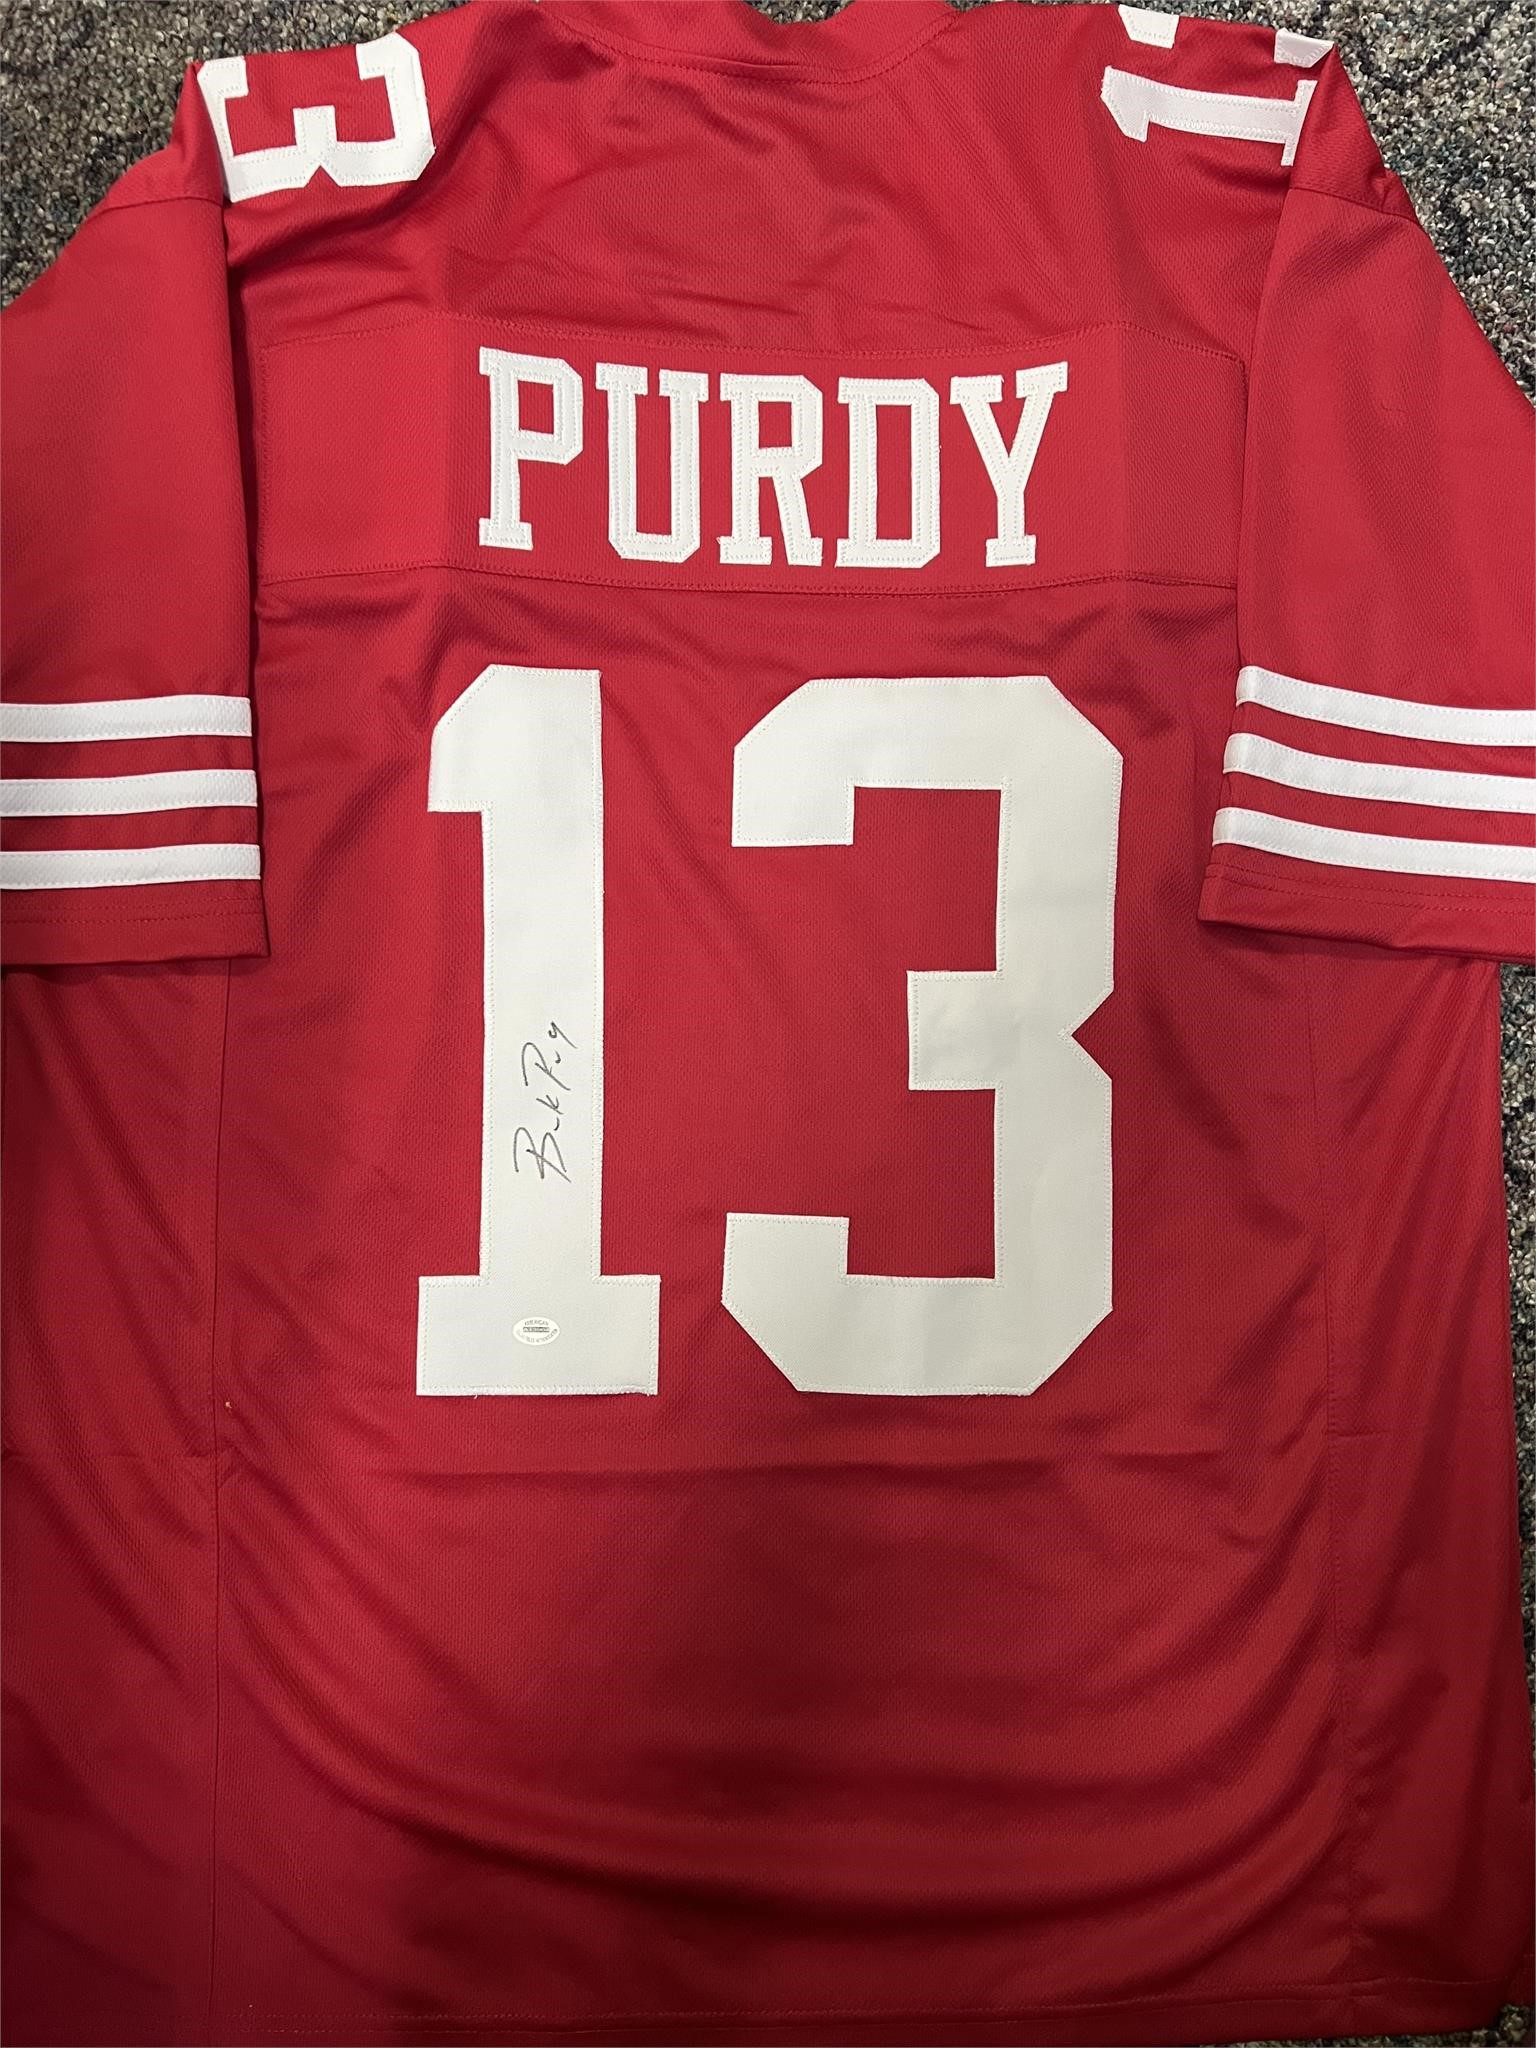 49ers Brock Purdy Signed Jersey with COA